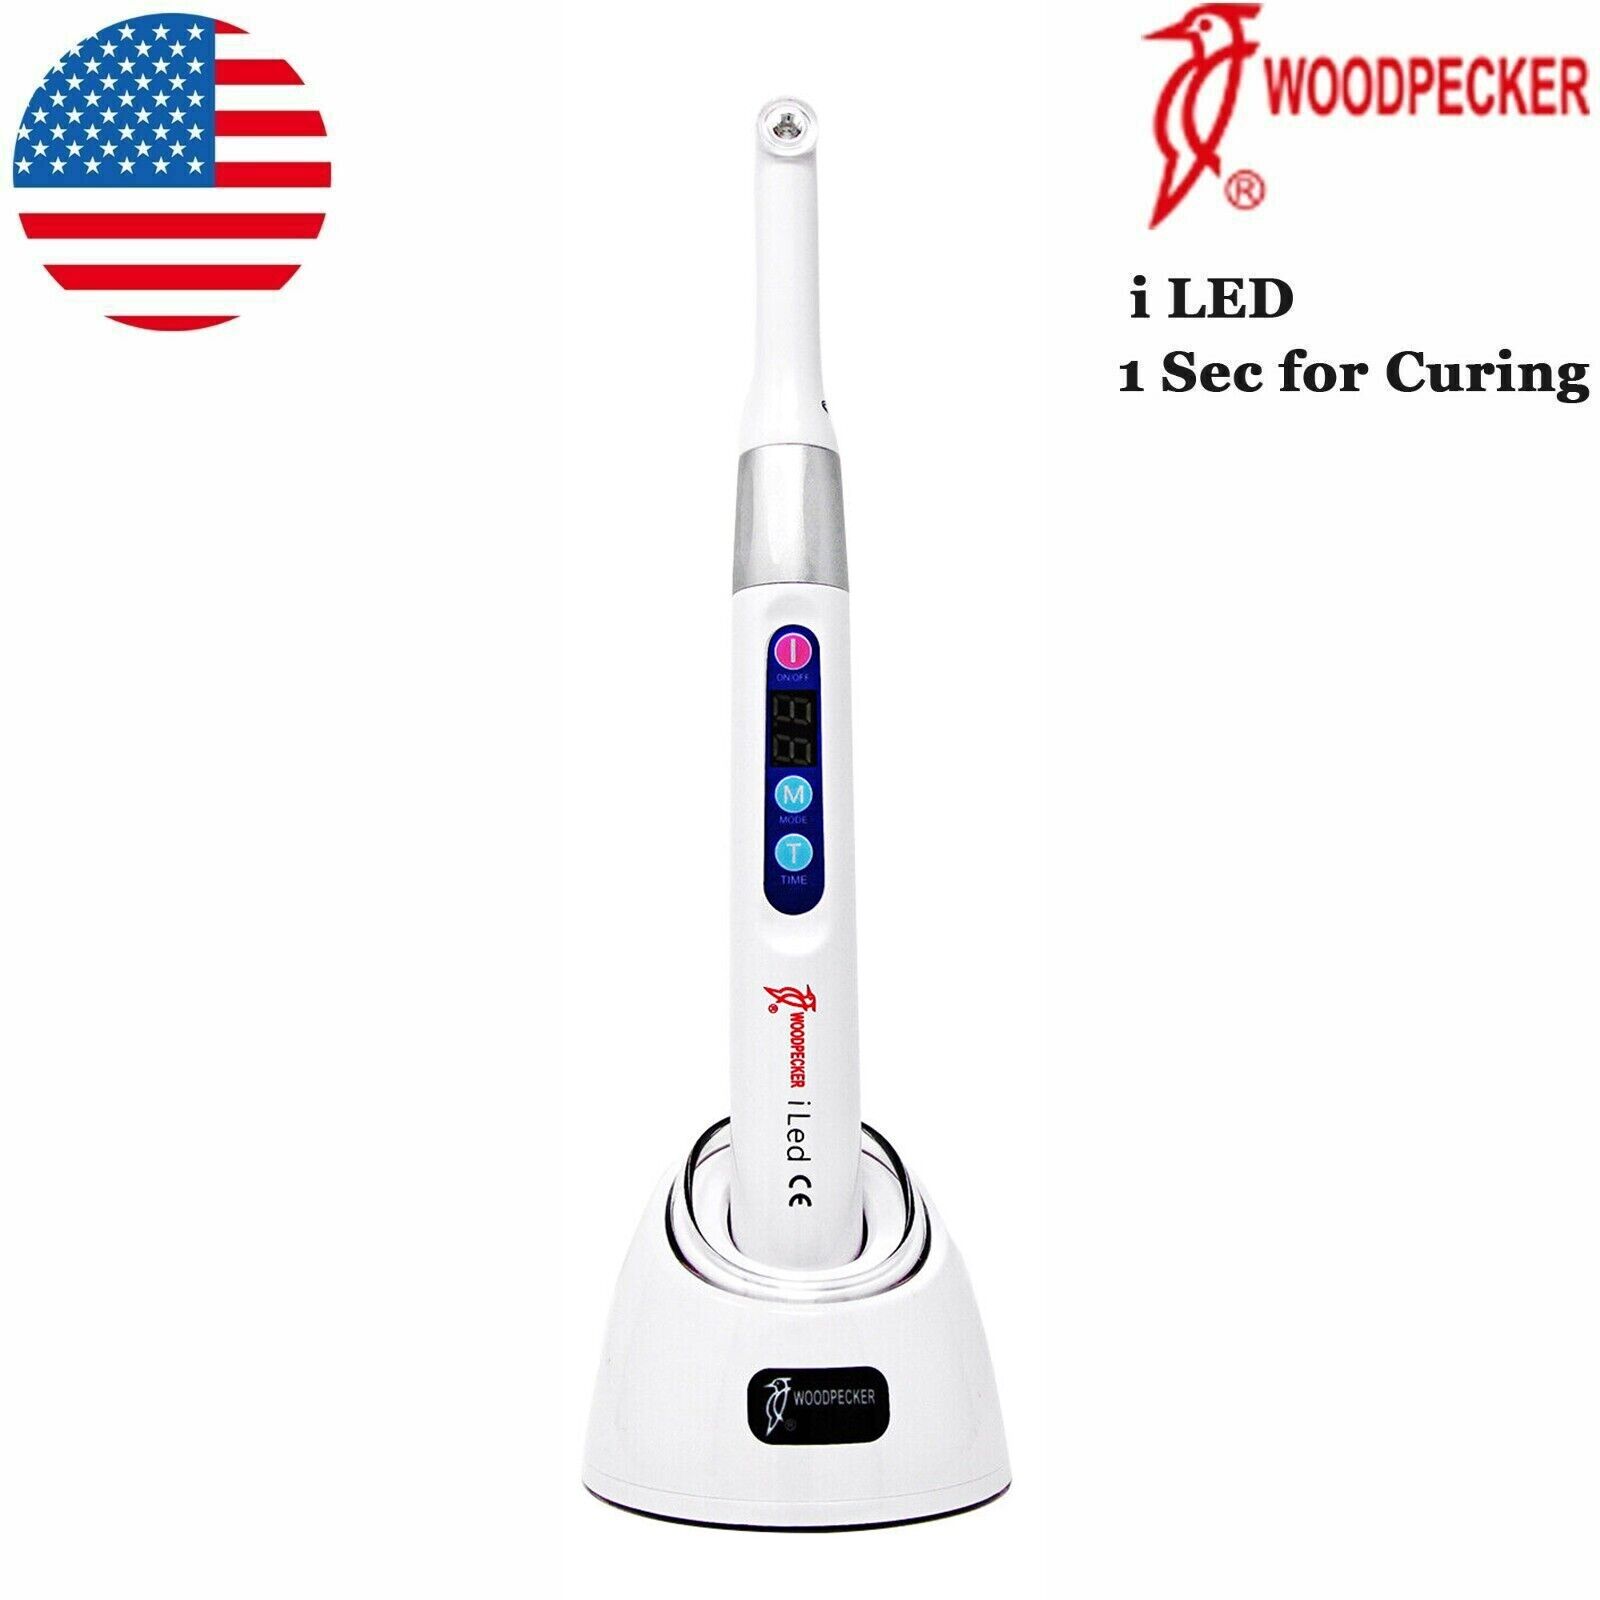 100% Woodpecker Dental iLED Curing Light Lamp Wireless 1 Second Curing 2500mw/c㎡